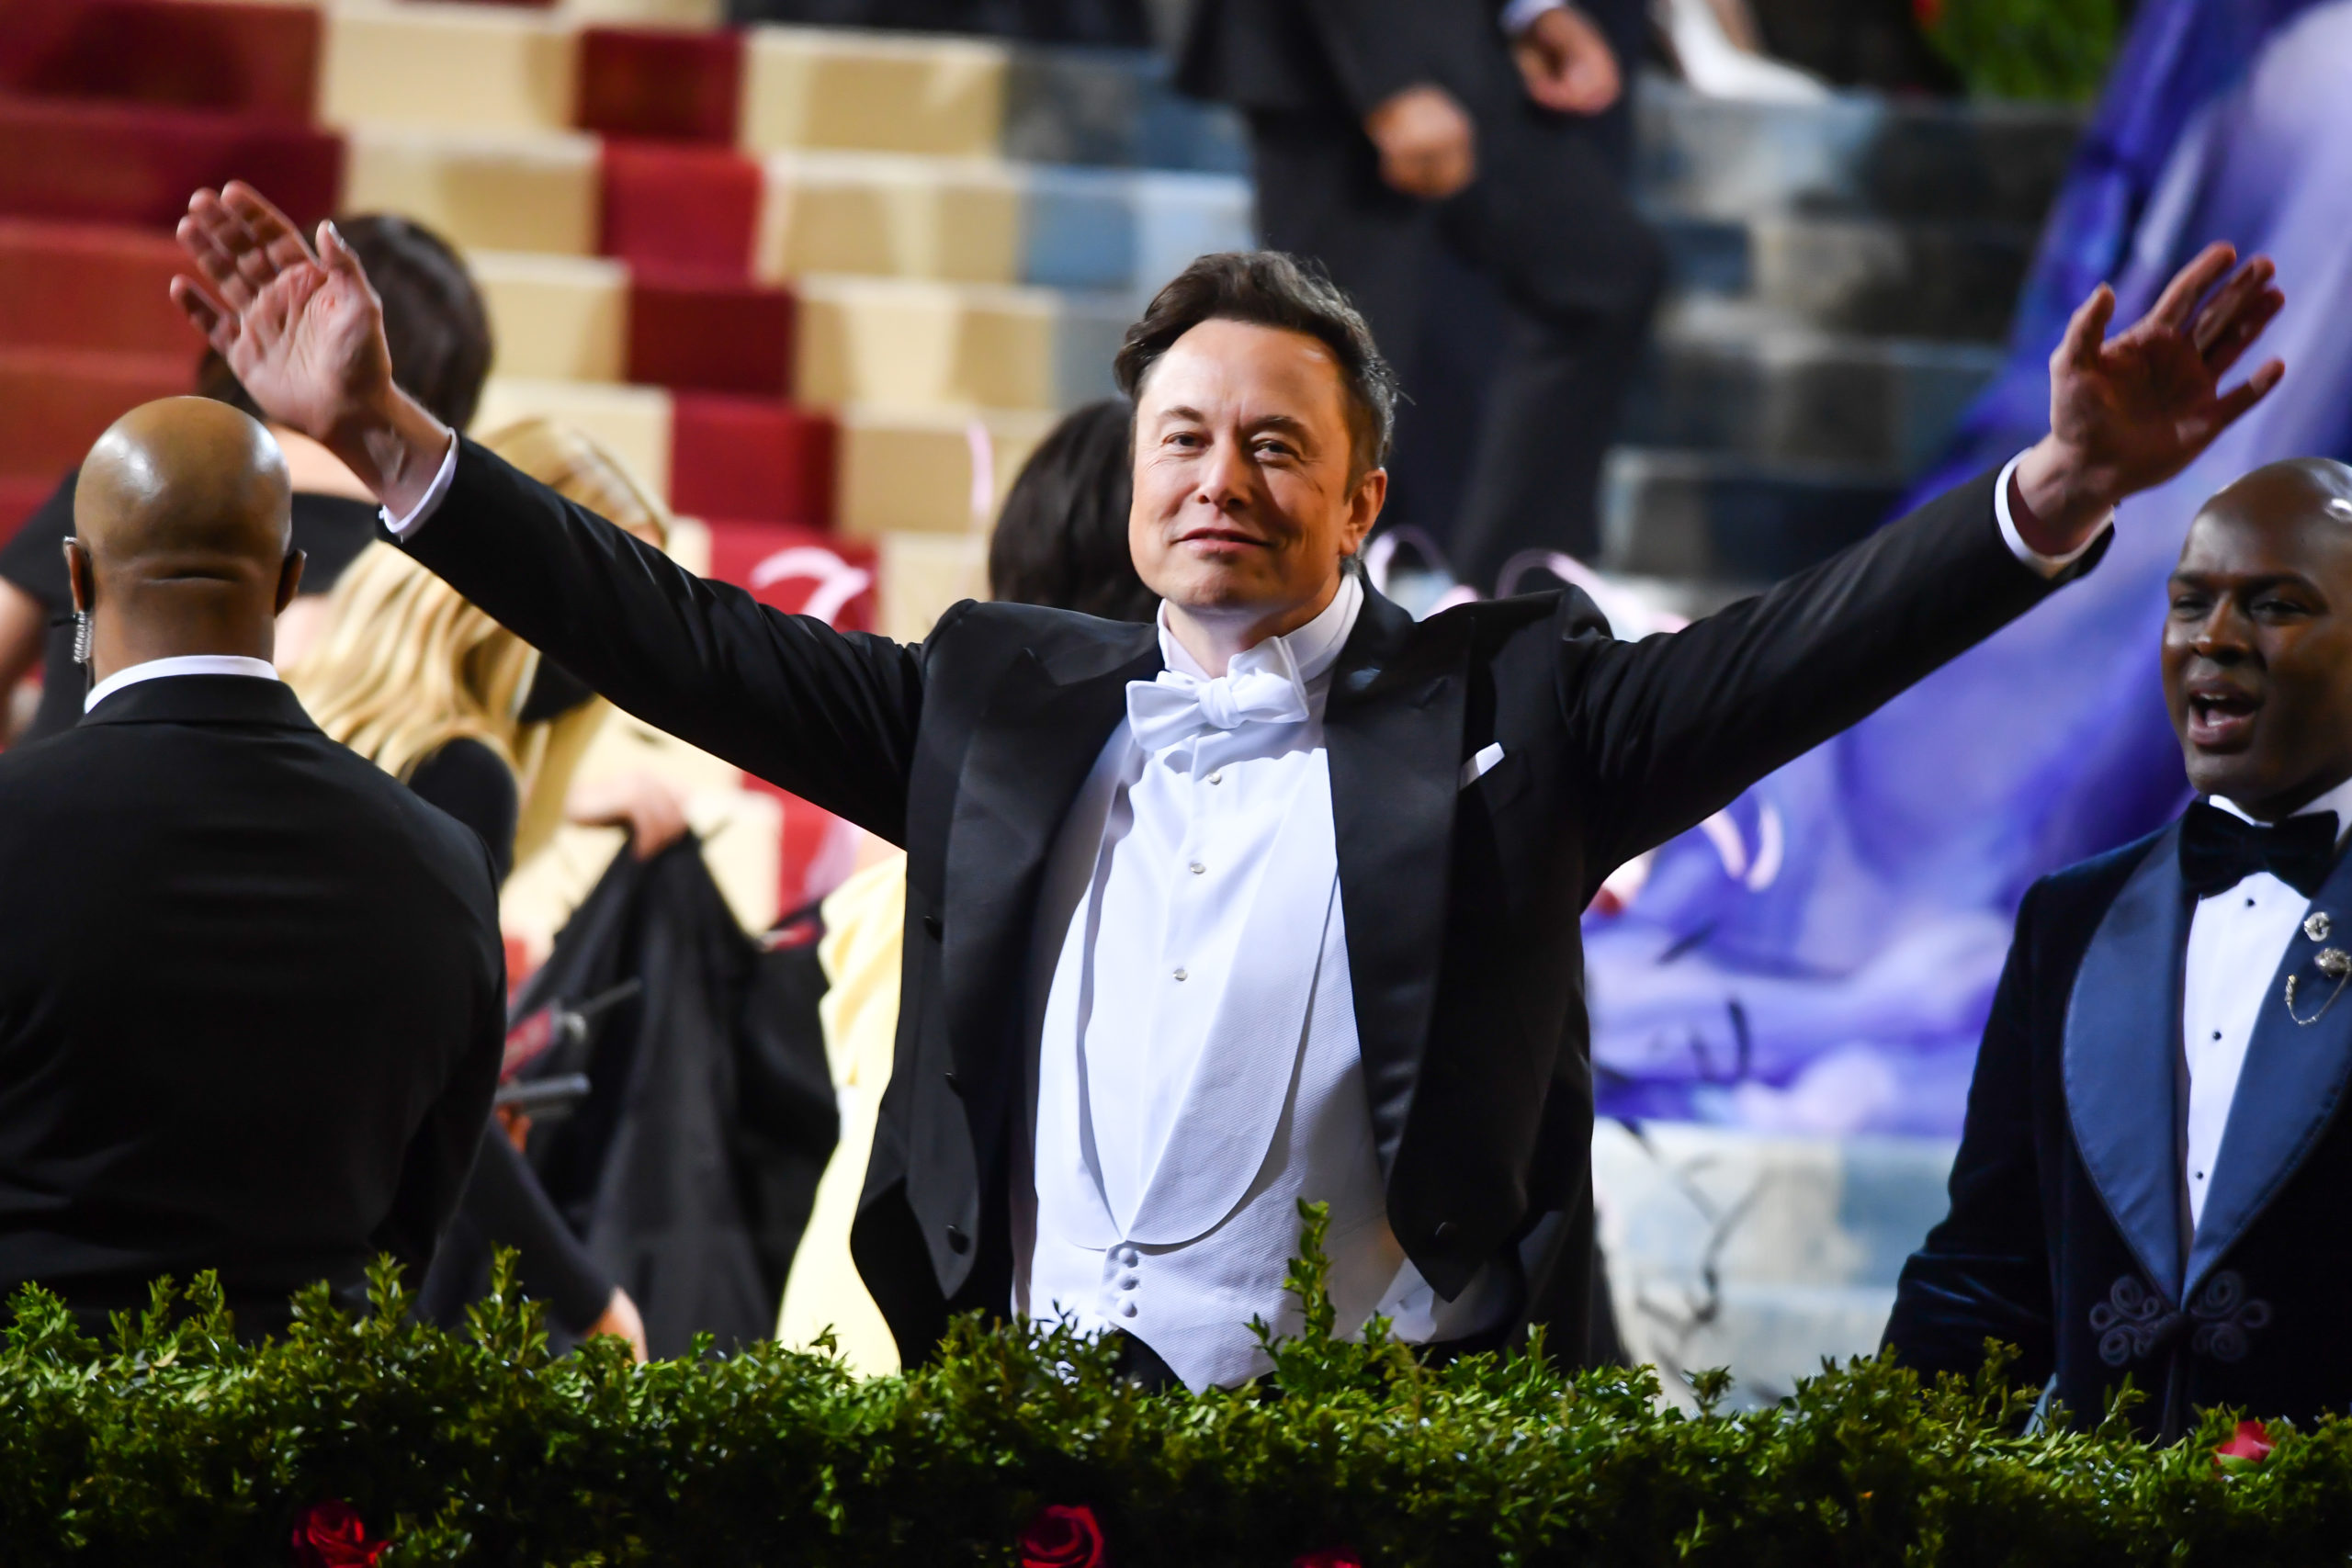 Will Elon Musk's inflexibility on remote working cause Tesla to lose top talent?